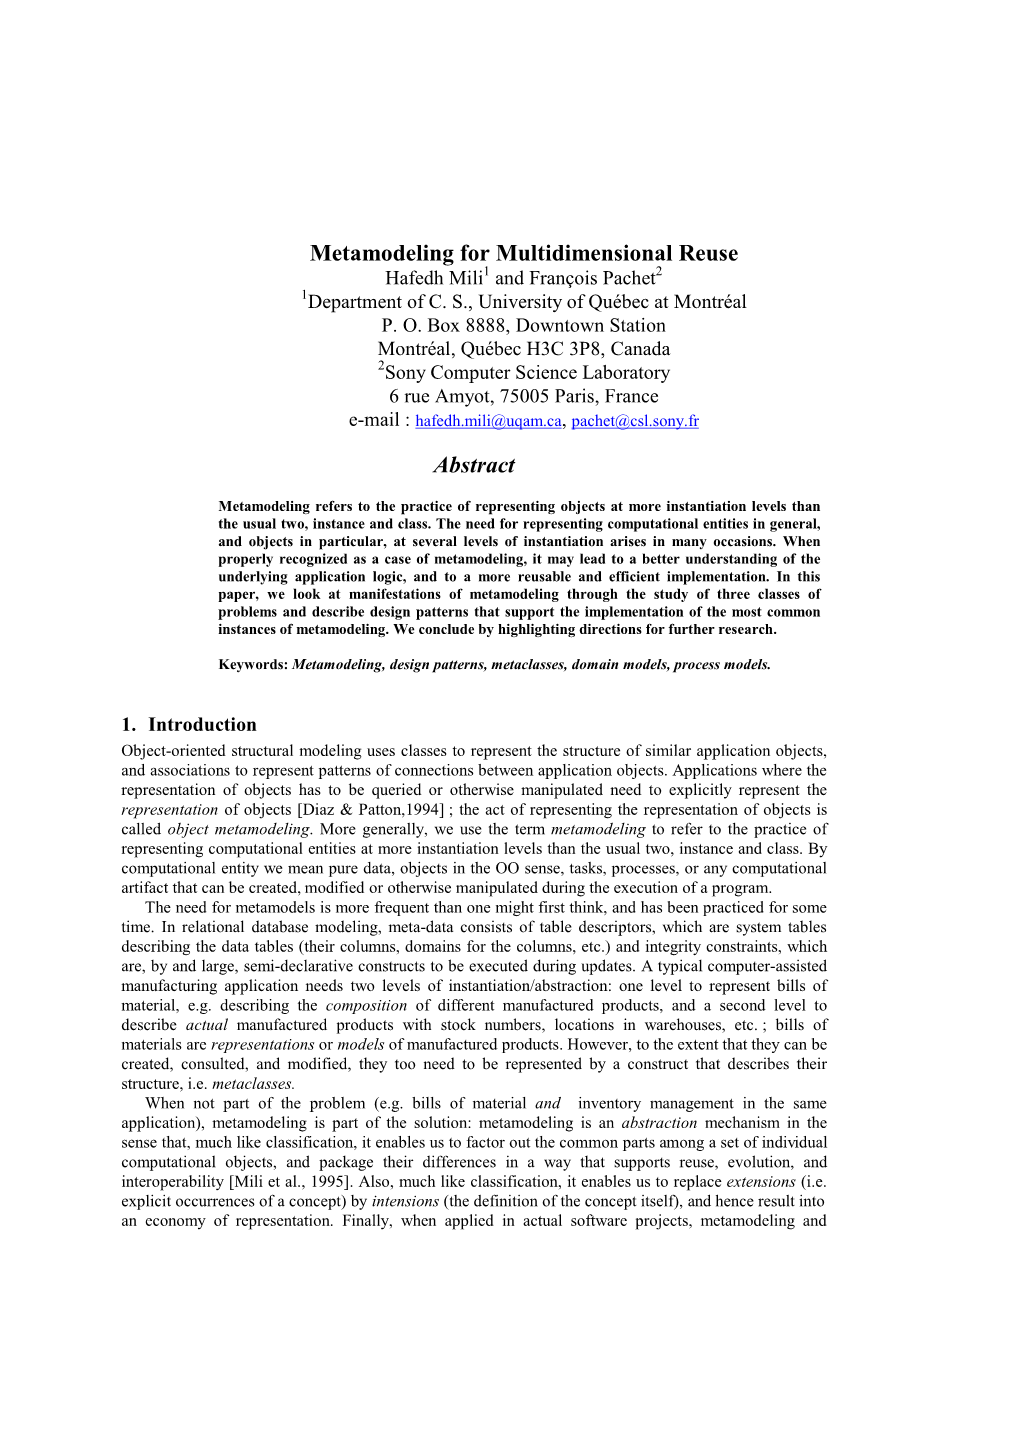 Metamodeling for Multidimensional Reuse Abstract